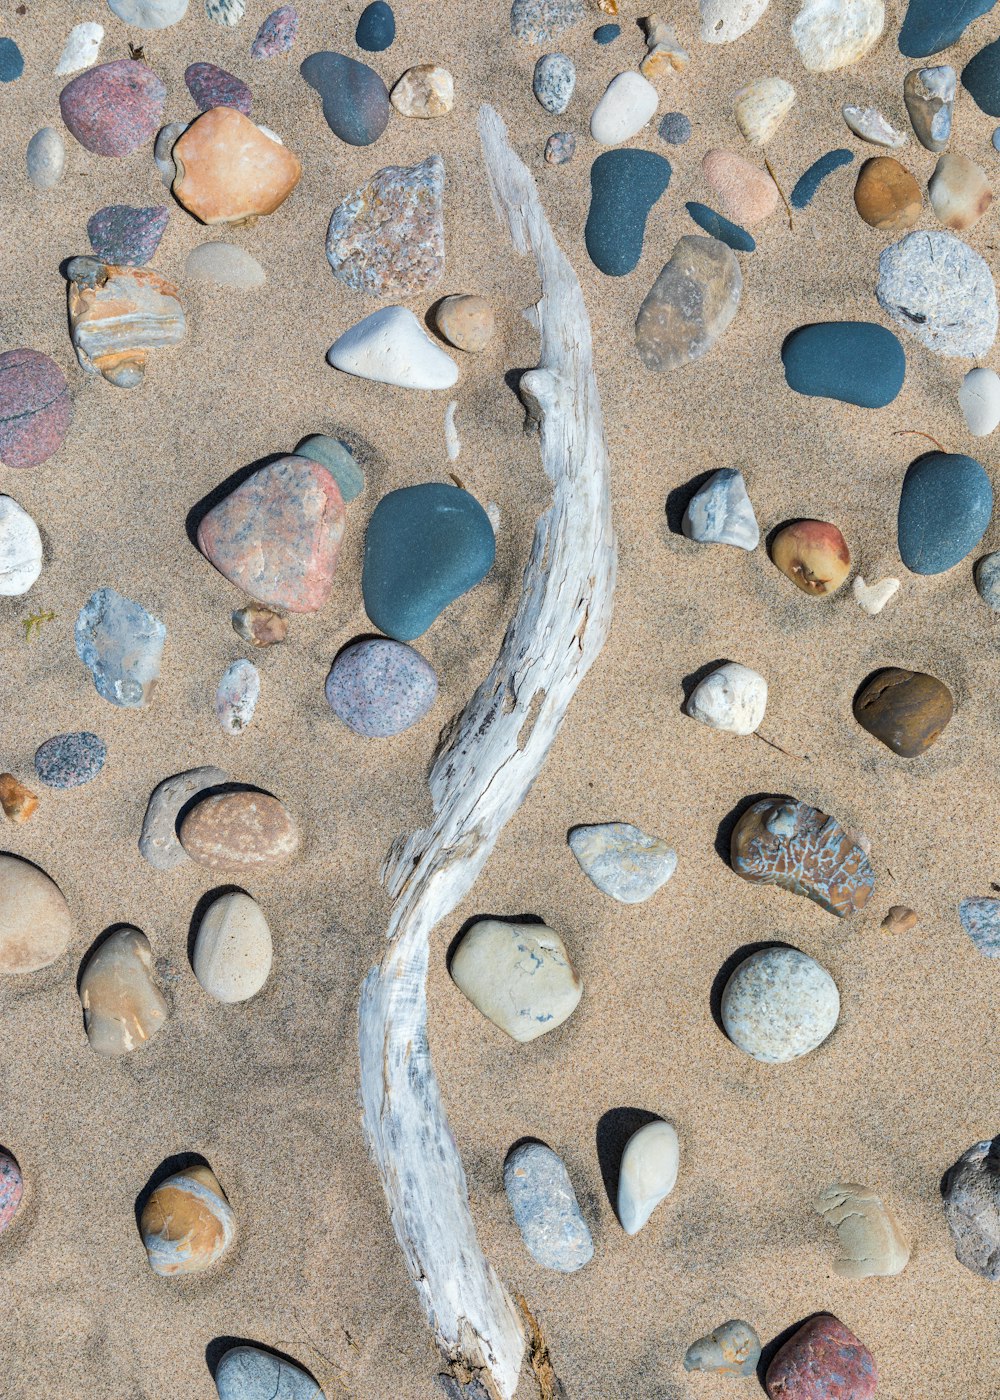 blue and brown stone fragments on beach